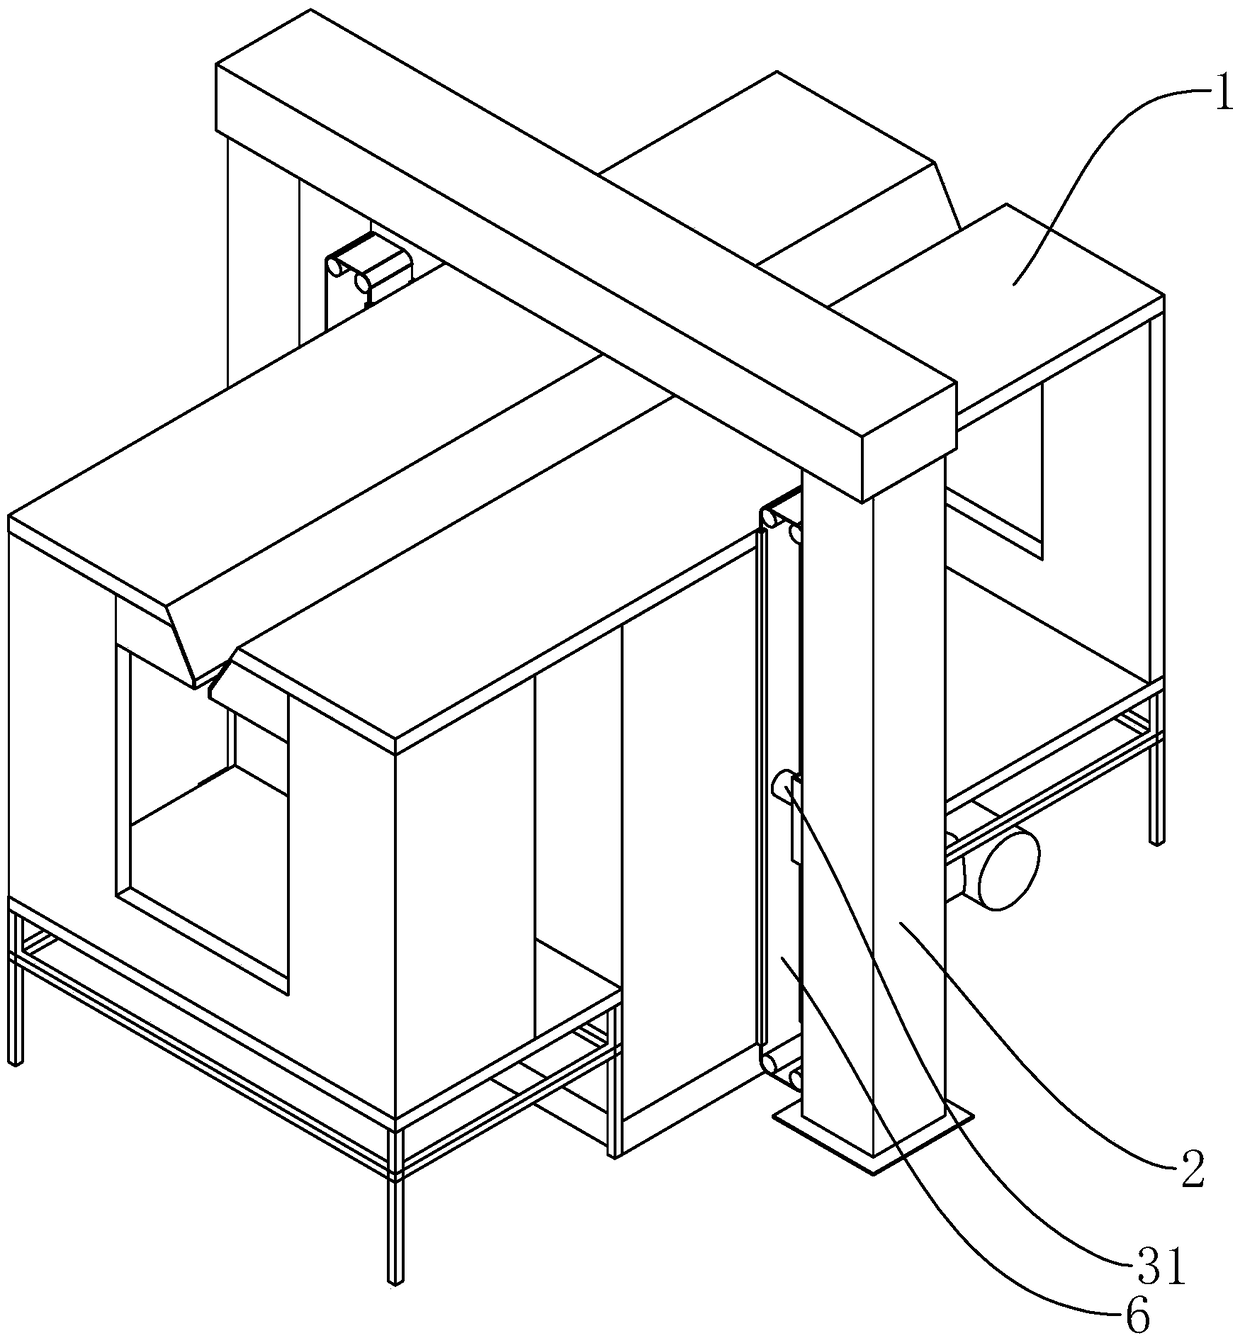 Powder spraying chamber with automatic gun collection beam inlet-outlet groove openings using dynamic sealing structures